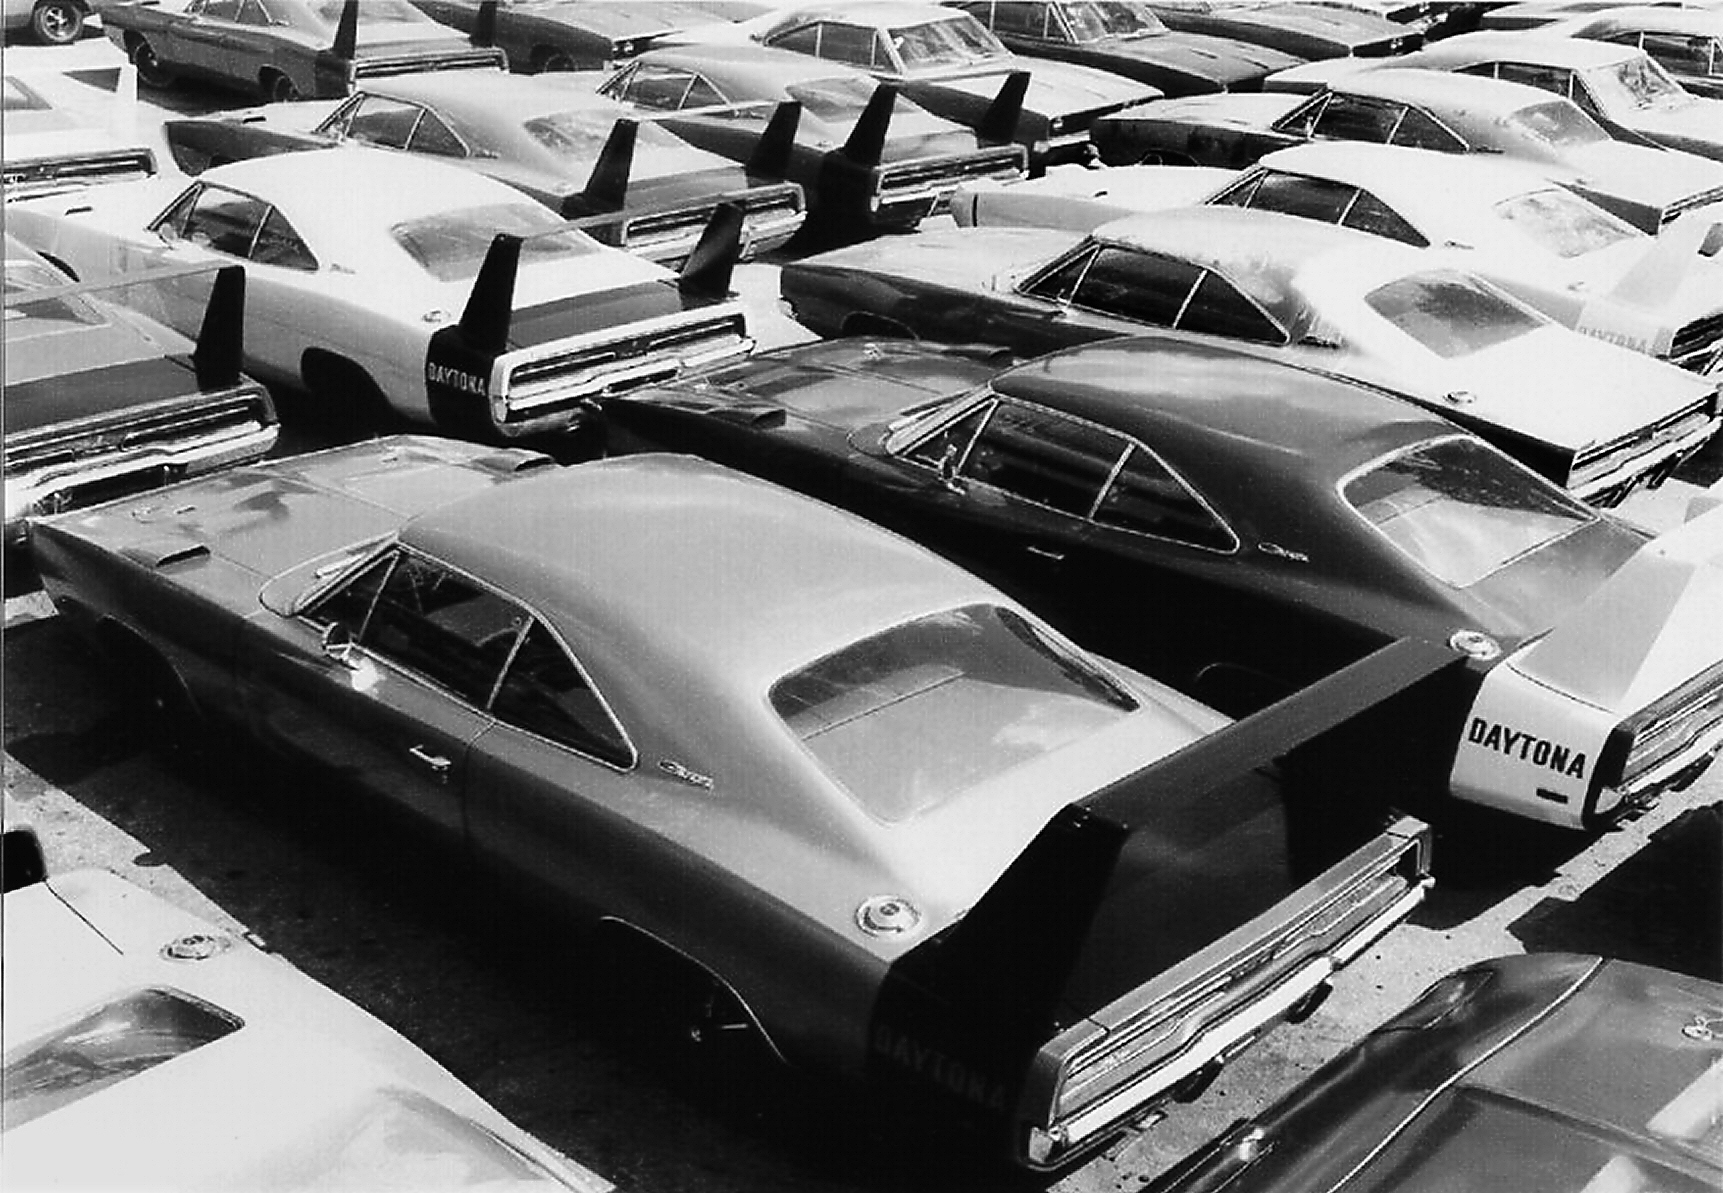 Hamtramck Assembly Plant: Daytonas waiting to be shipped to dealers.